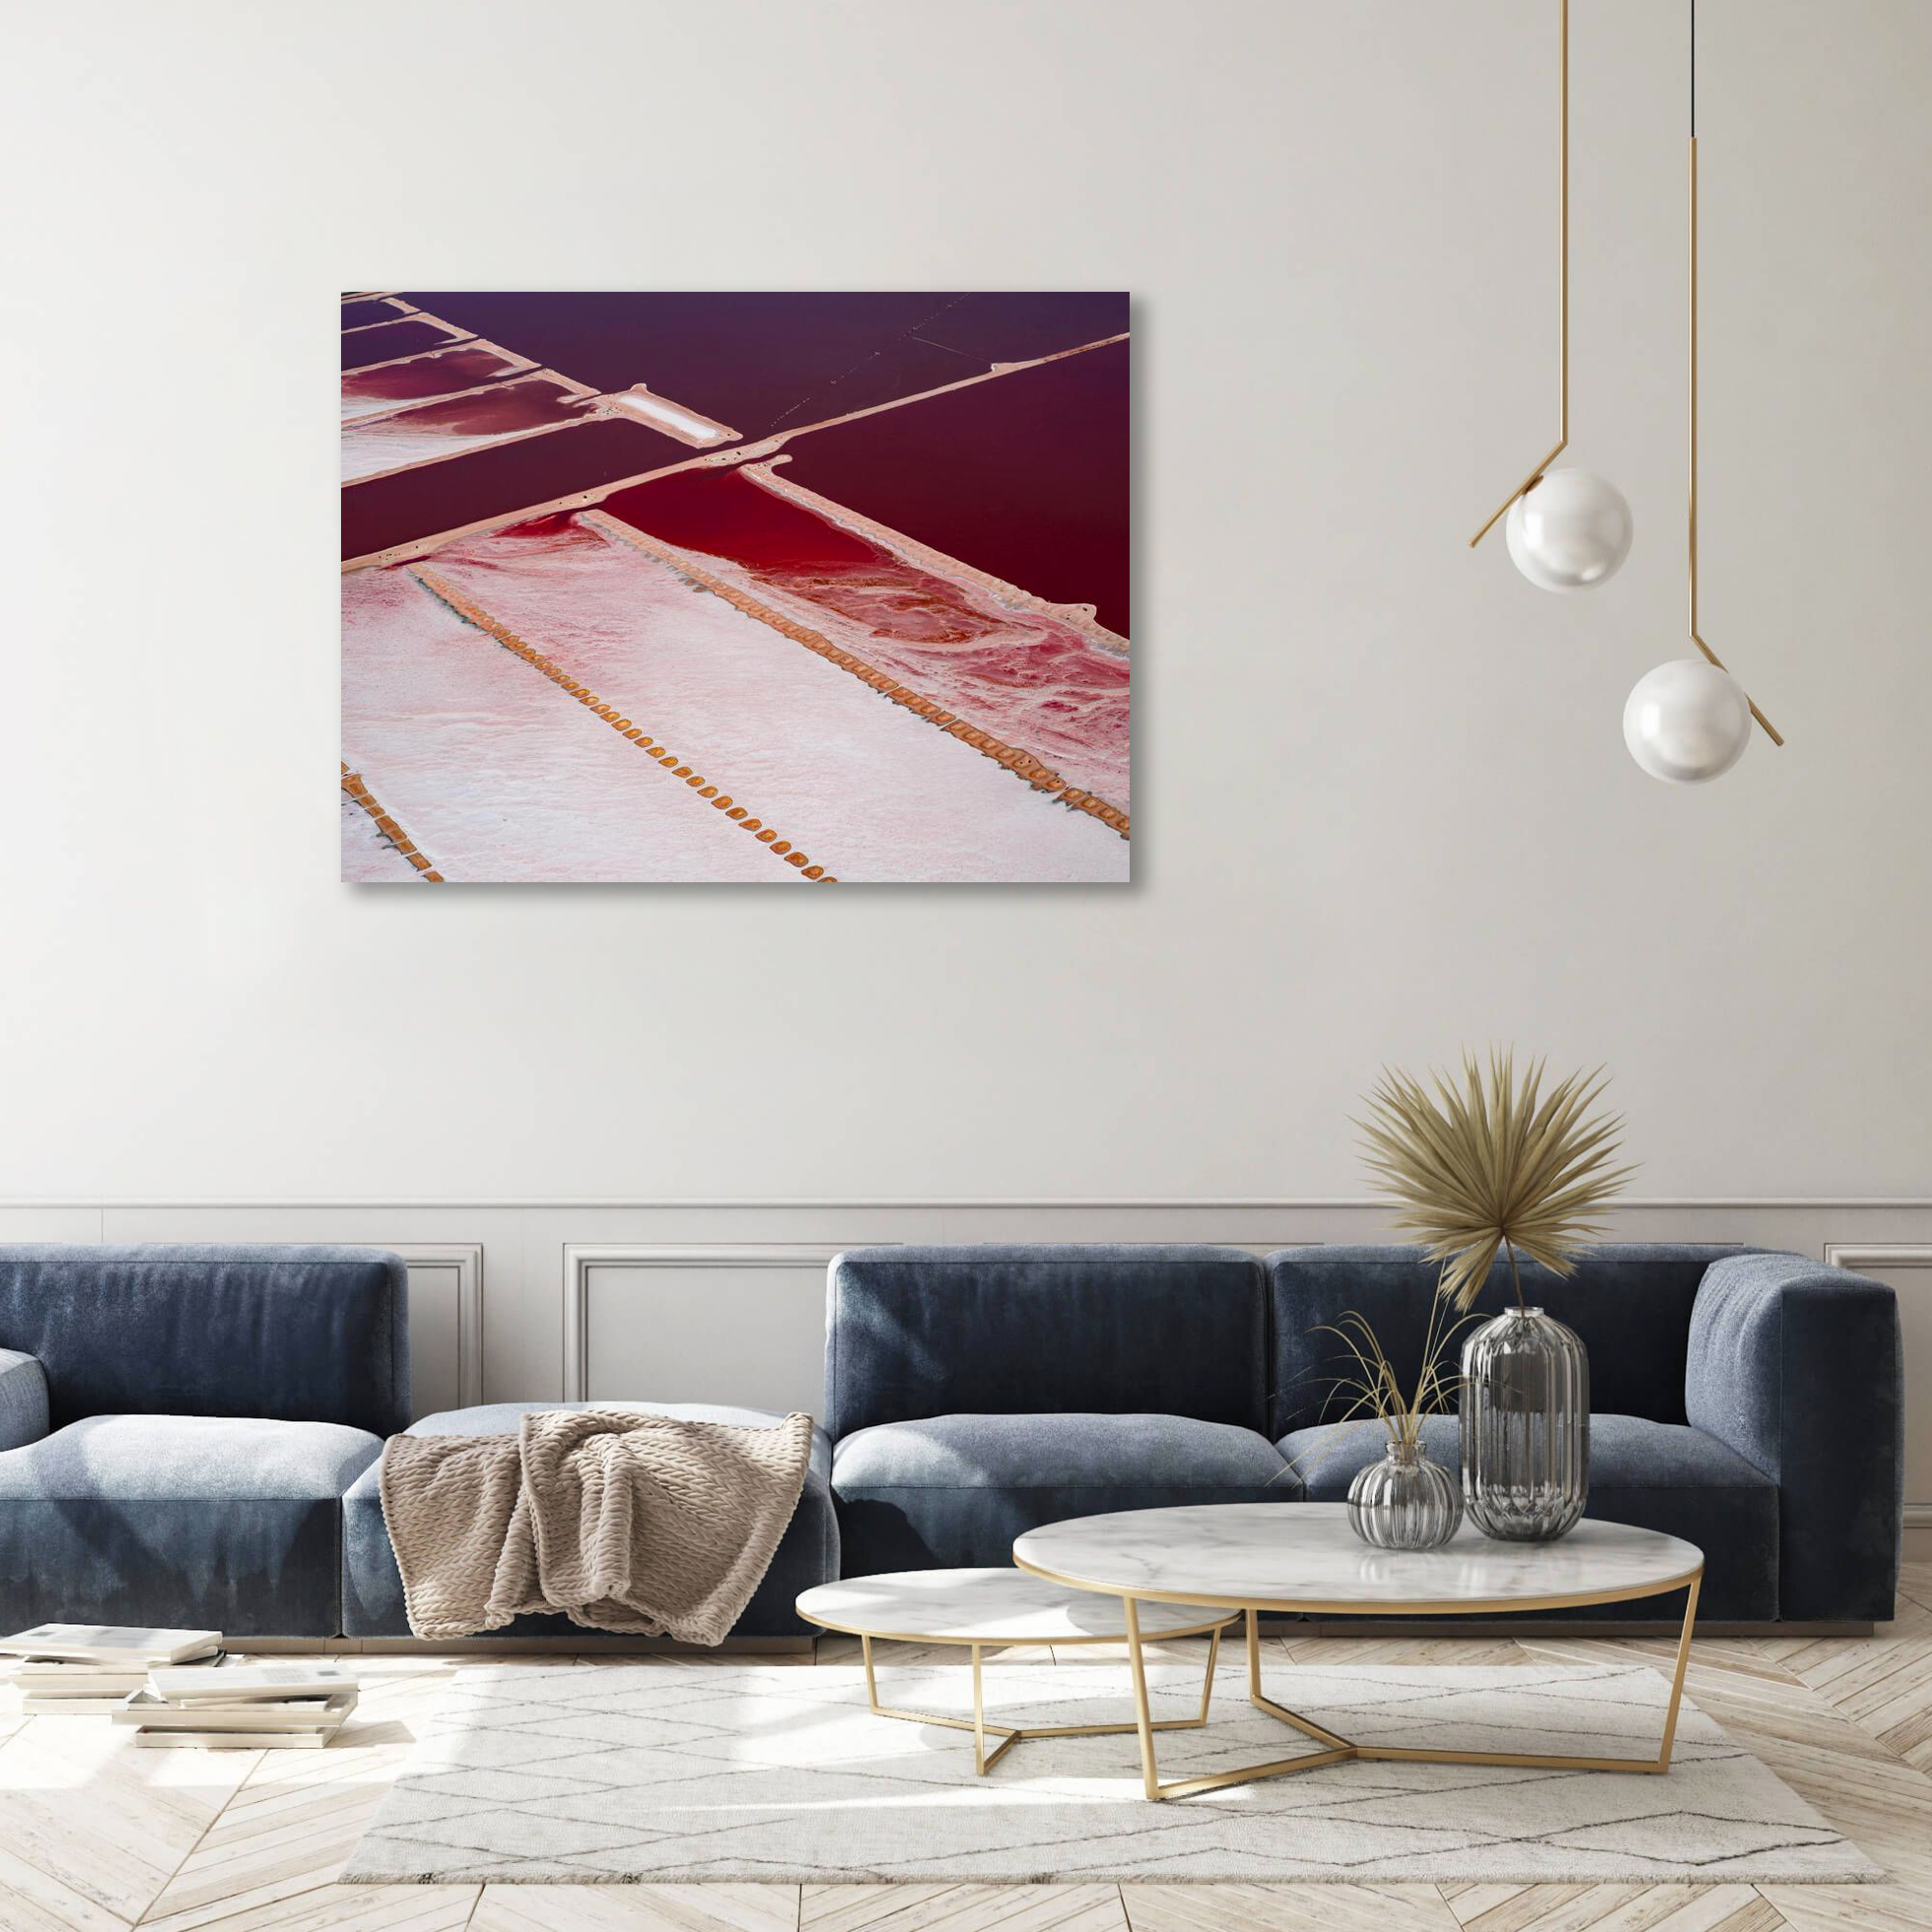 Pretty in Pink: Decorate Your Home With Pink Artwork